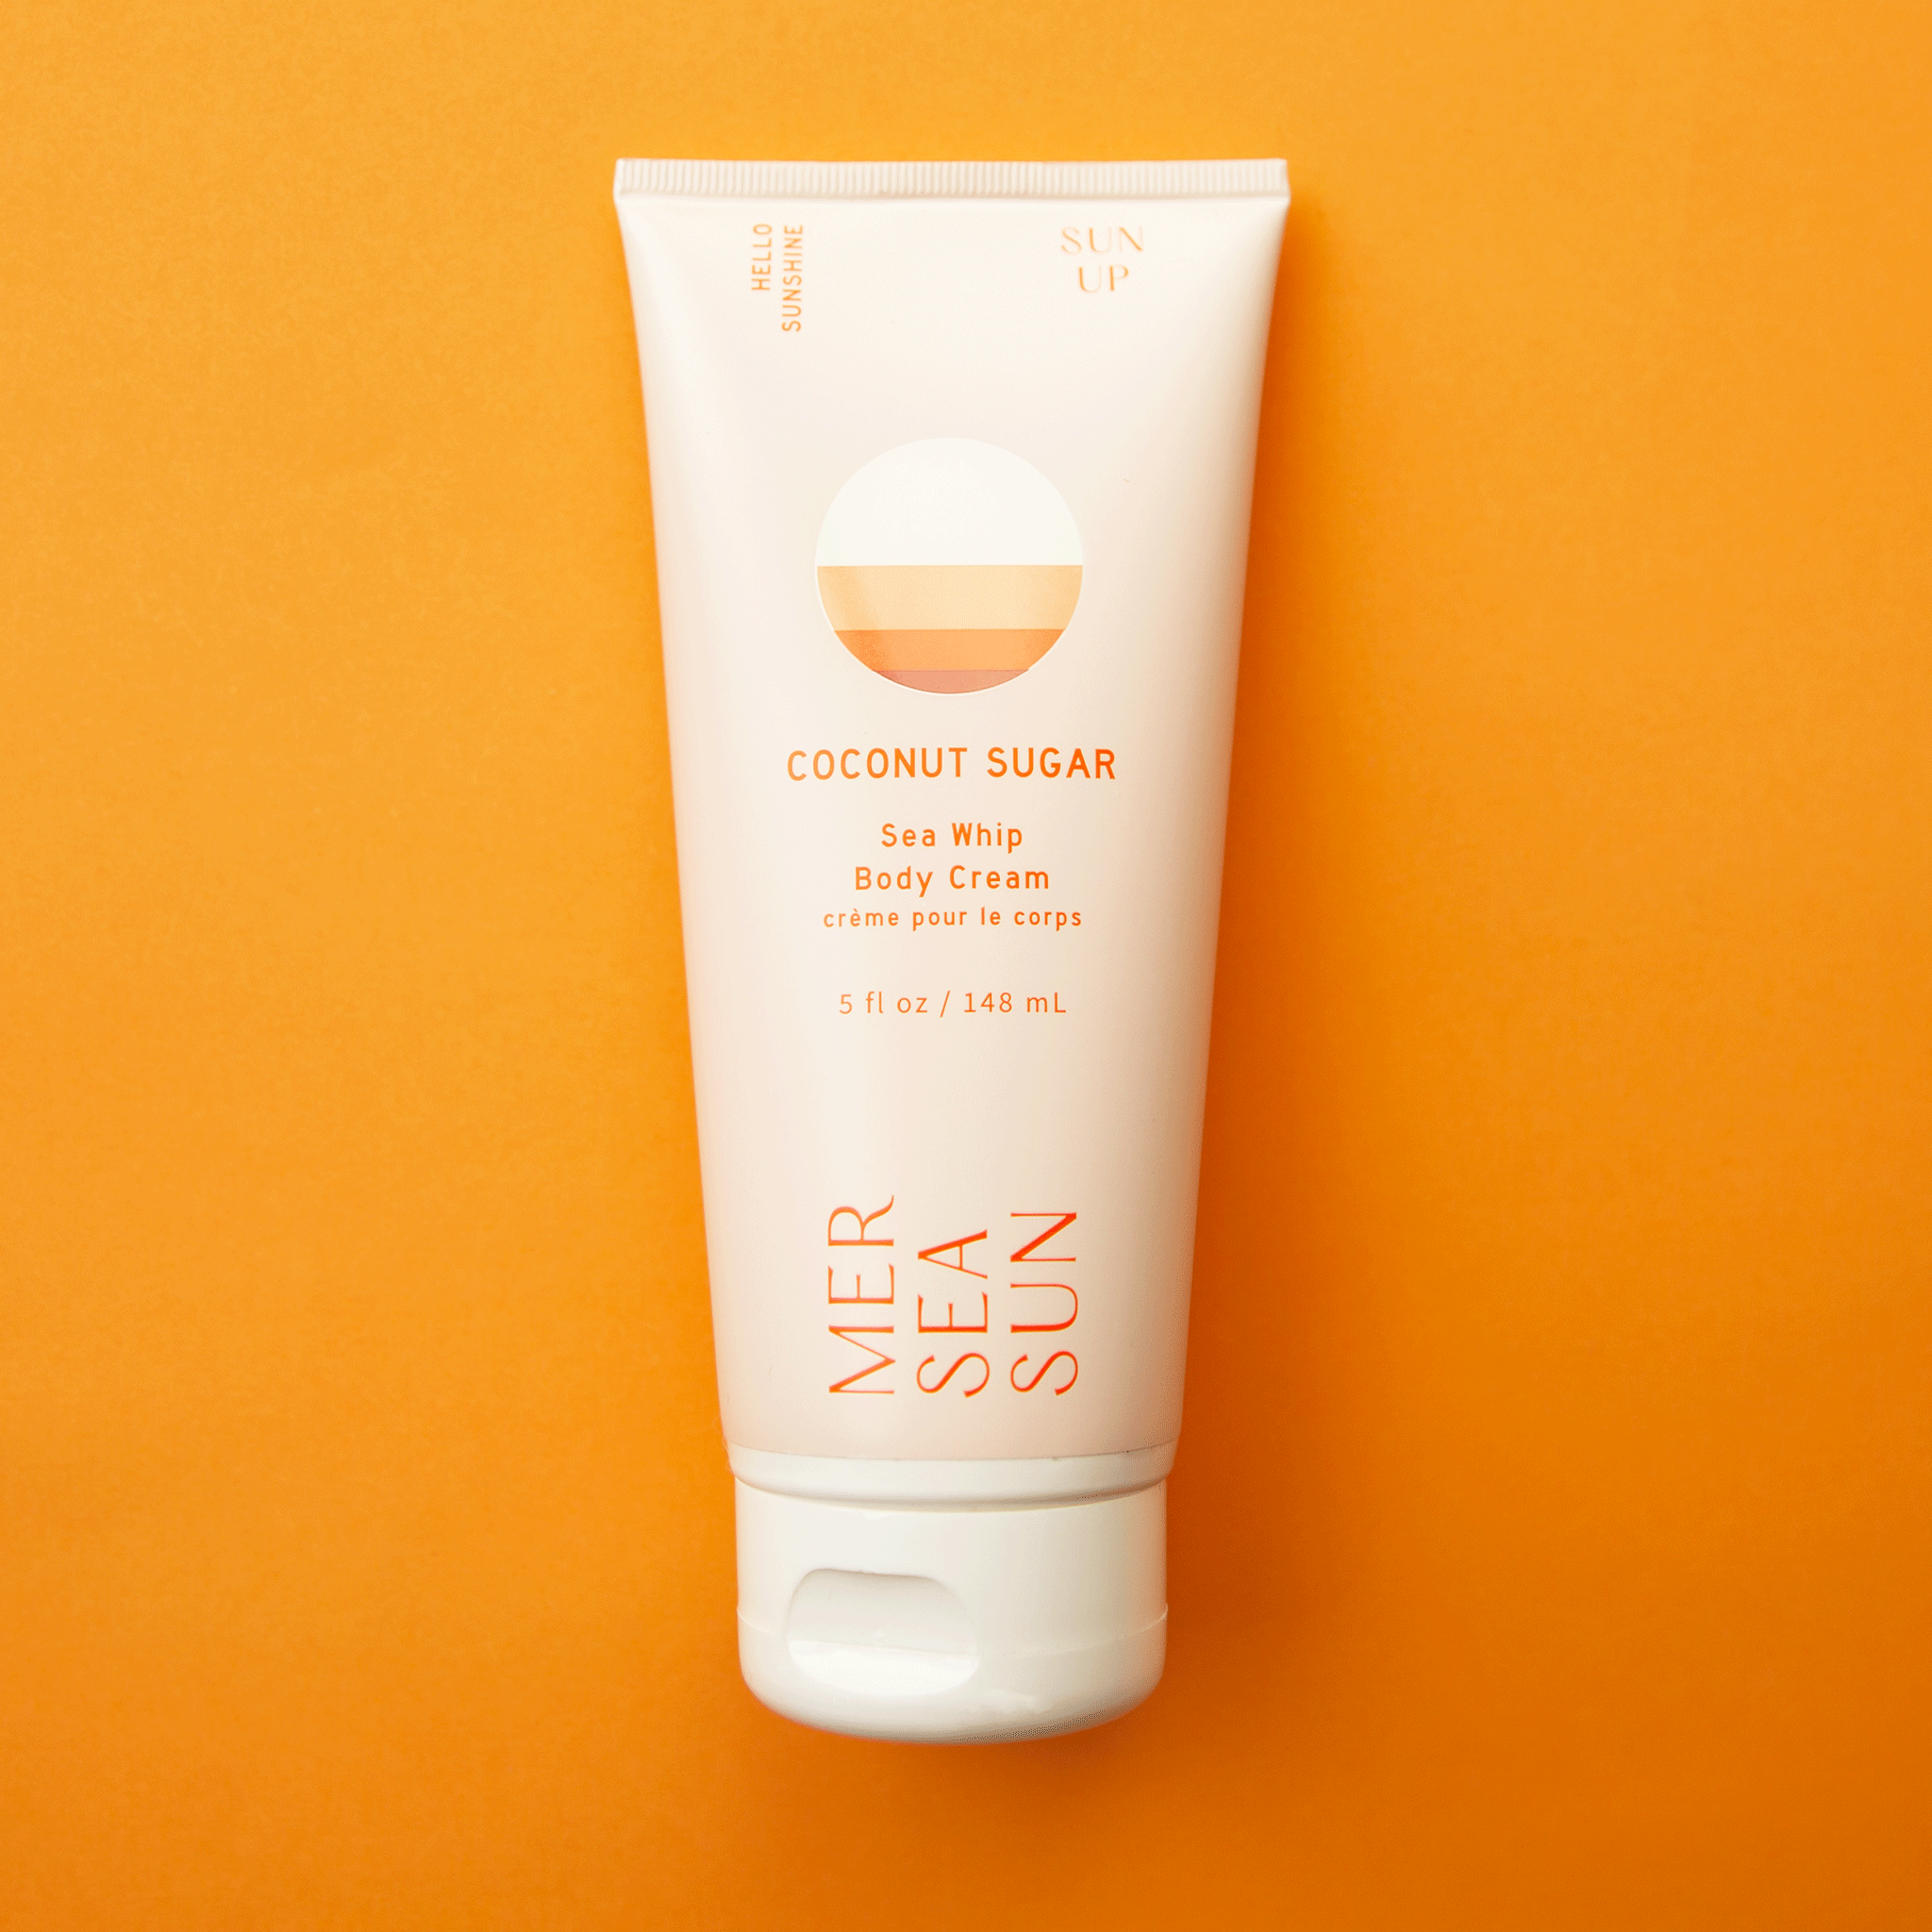 On an orange background is a light pink bottle of lotion with orange text on the front that reads, "Mersea Sun Coconut Sugar Sea Whip Body Cream".